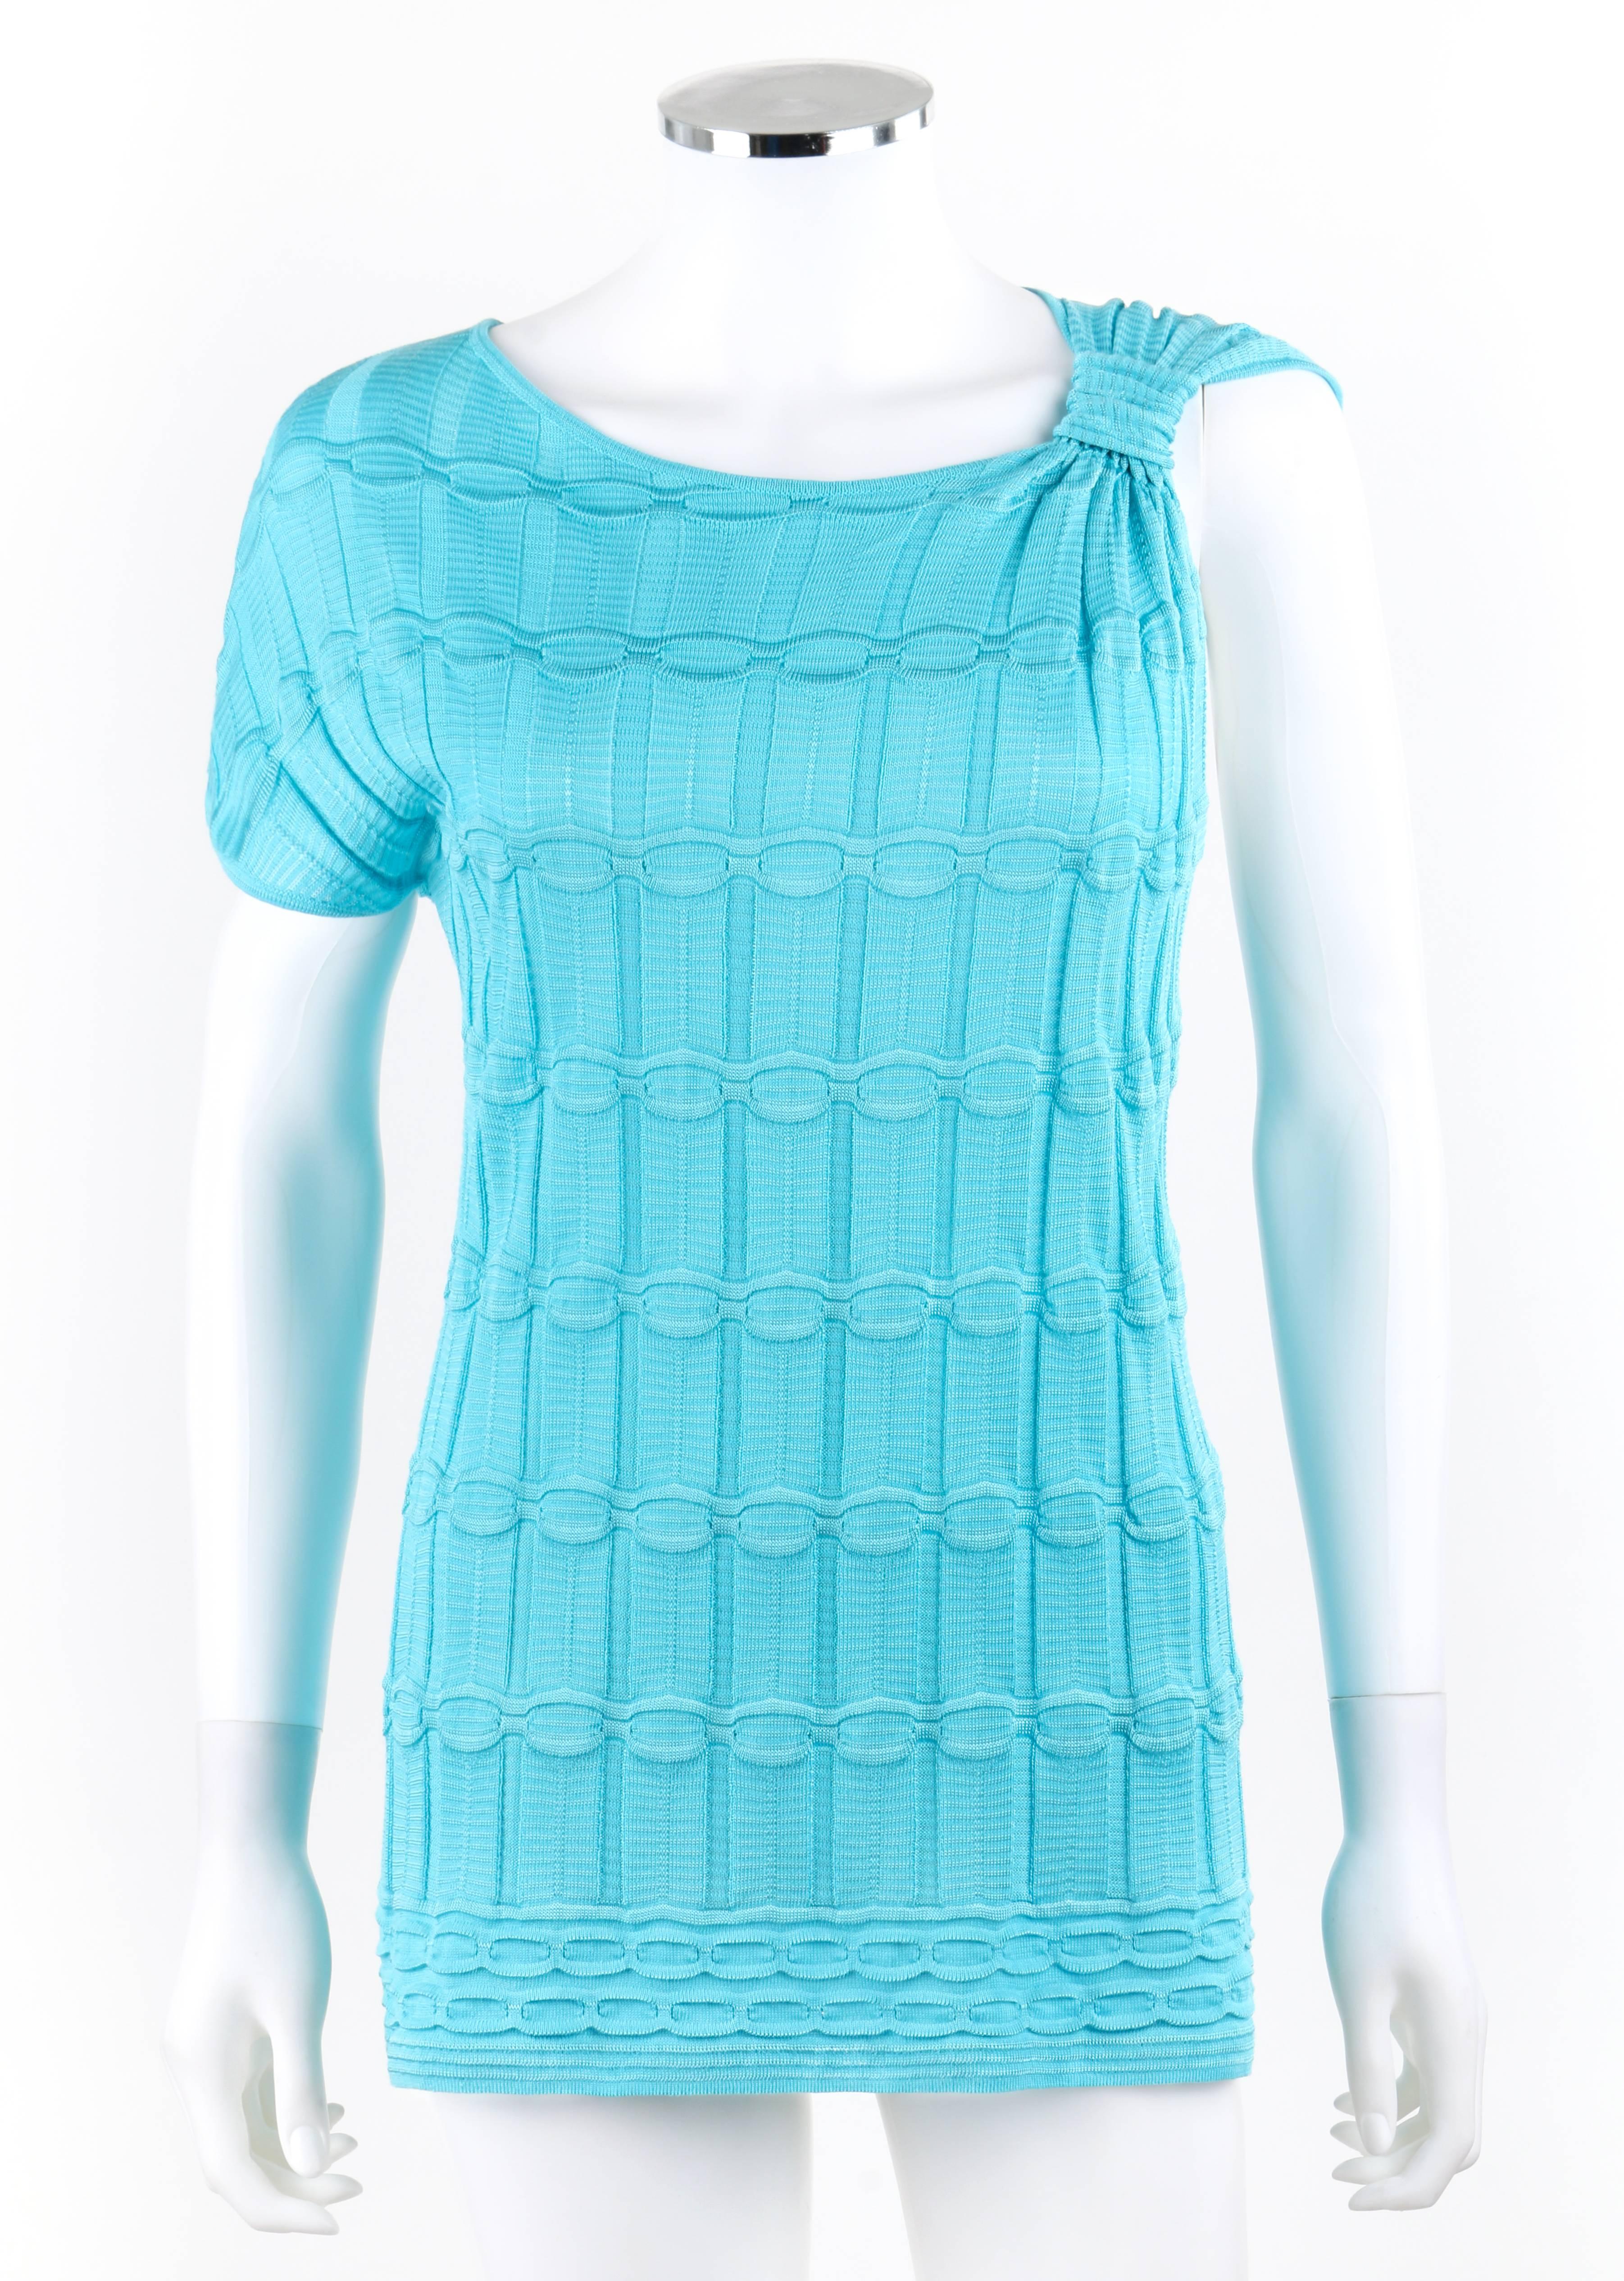 M Missoni turquoise blue knit asymmetrical one sleeve scoop neck top; New with tags. Designed by Angela Missoni. Turquoise blue textured large rib knit. Scoop neckline. Asymmetrical one sleeve: right extended shoulder sleeve and left sleeveless